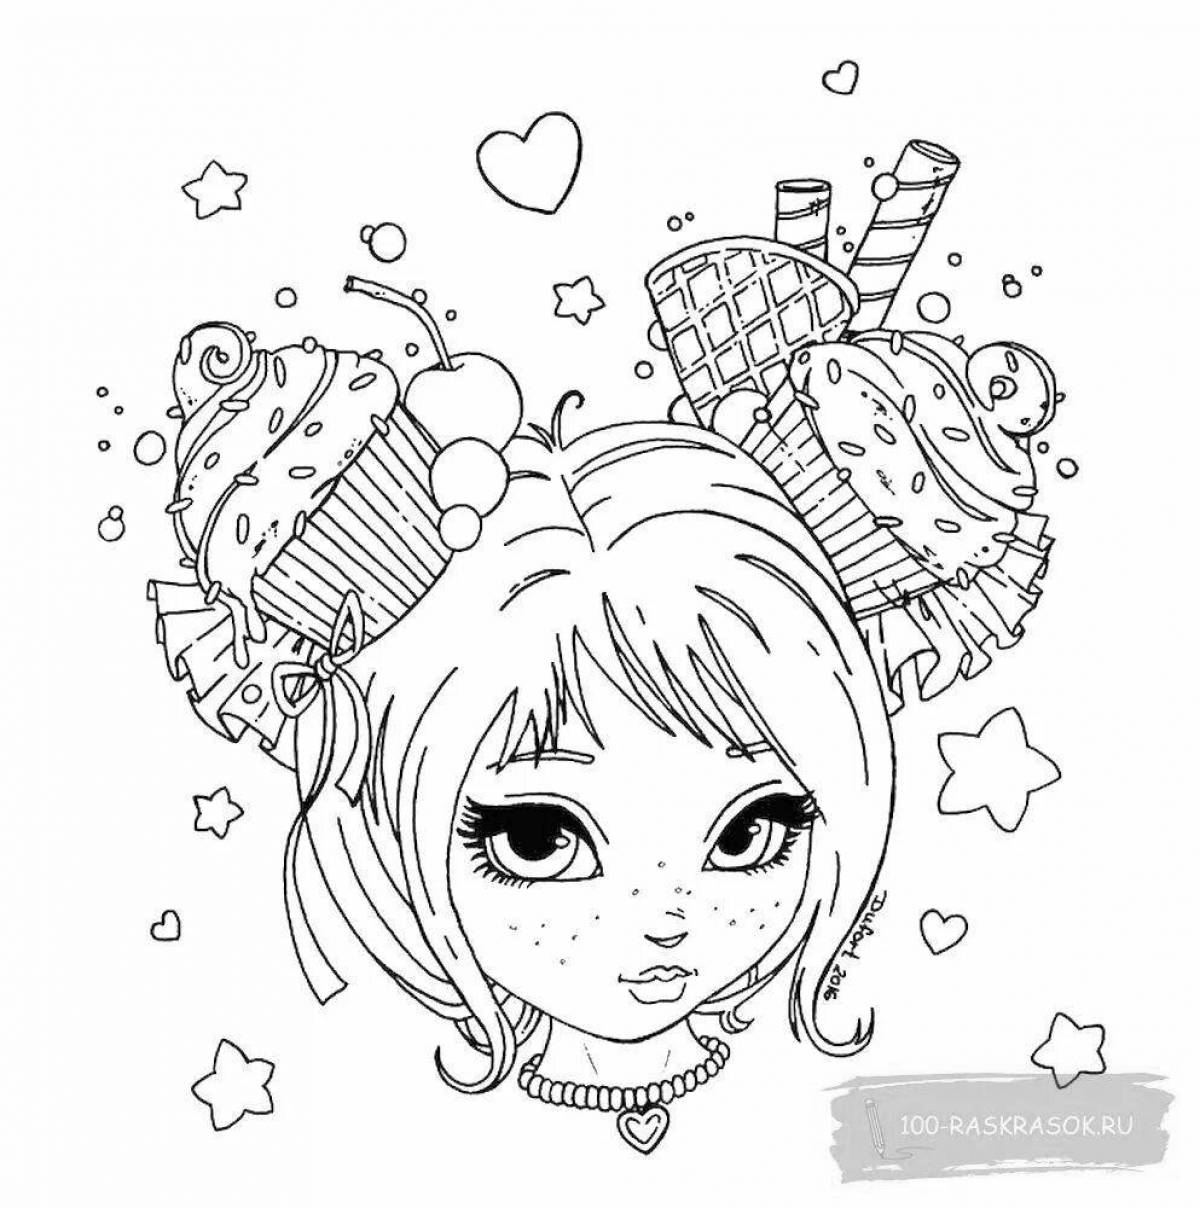 Fairytale coloring book for girls 11-12 years old